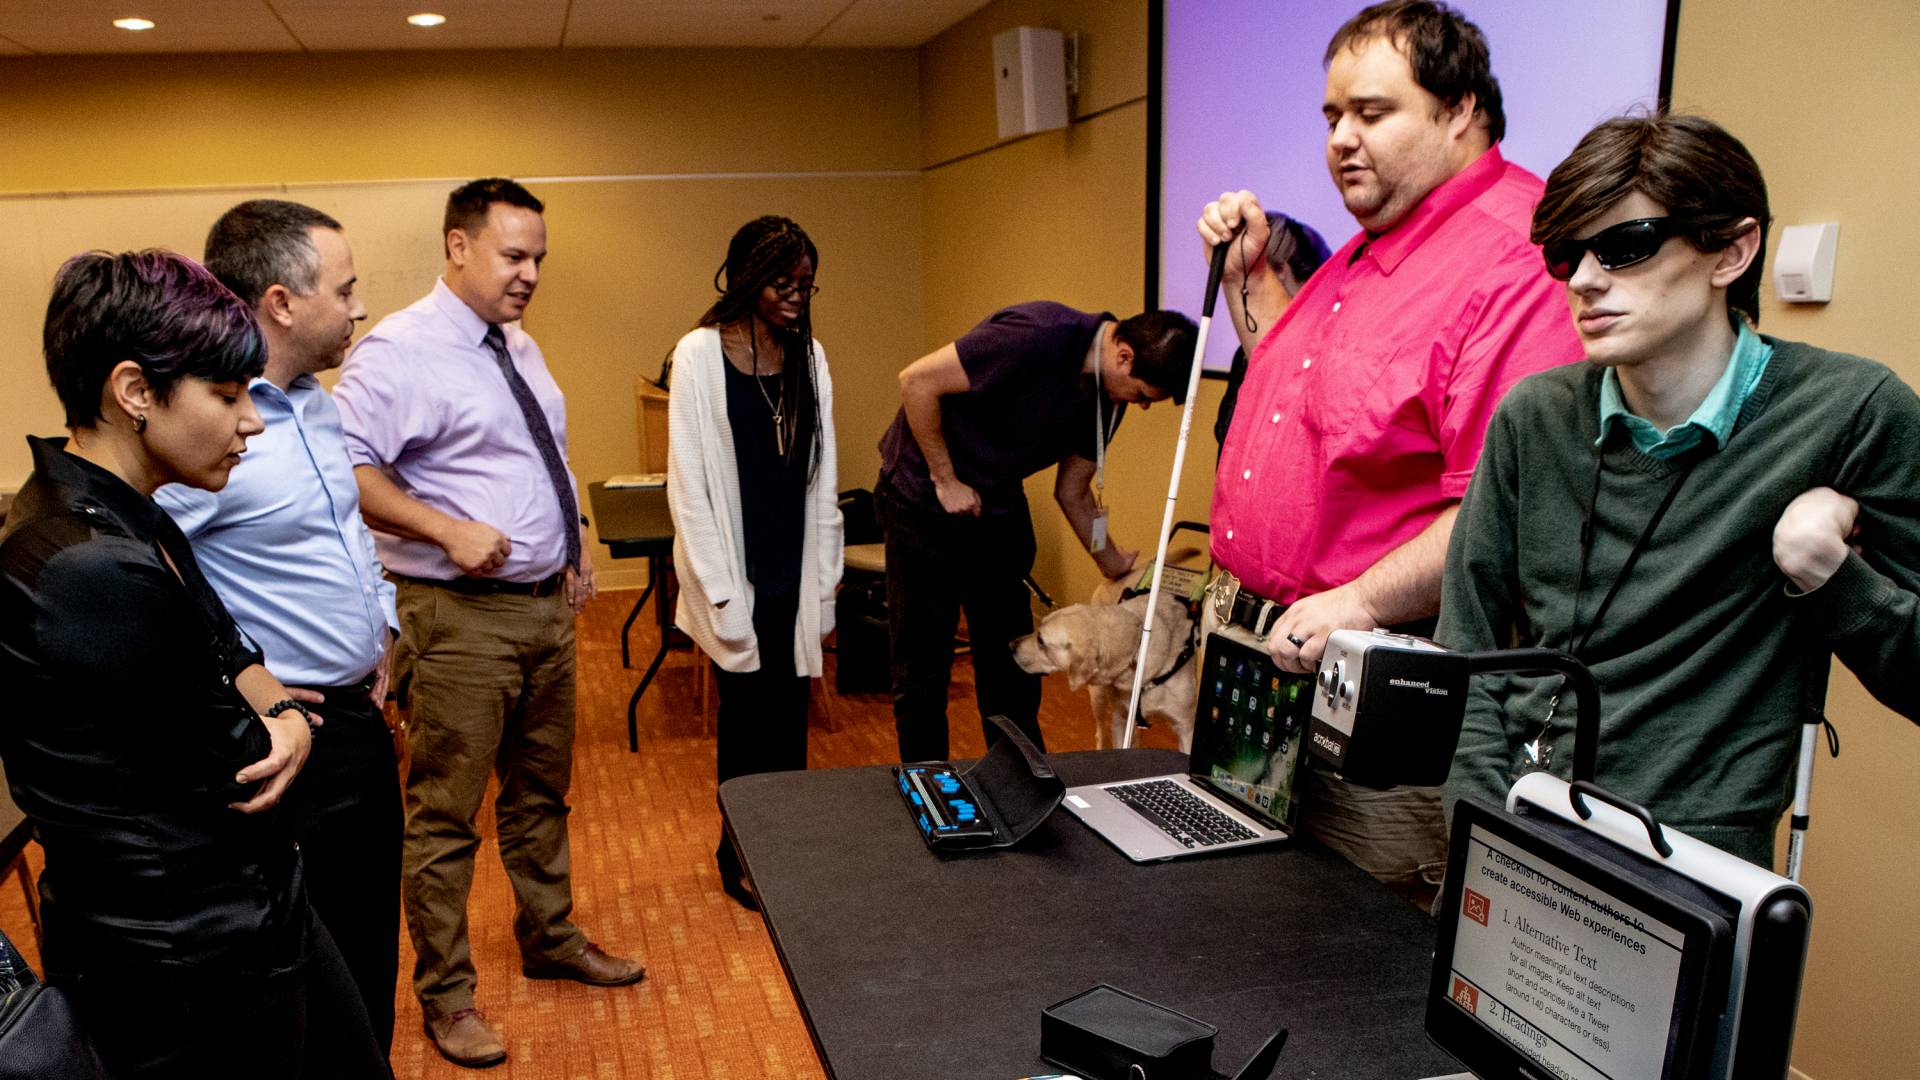 Representatives of the New Jersey Commission for the Blind and Visually Impaired demonstrate special screen readers for people with visual impairments